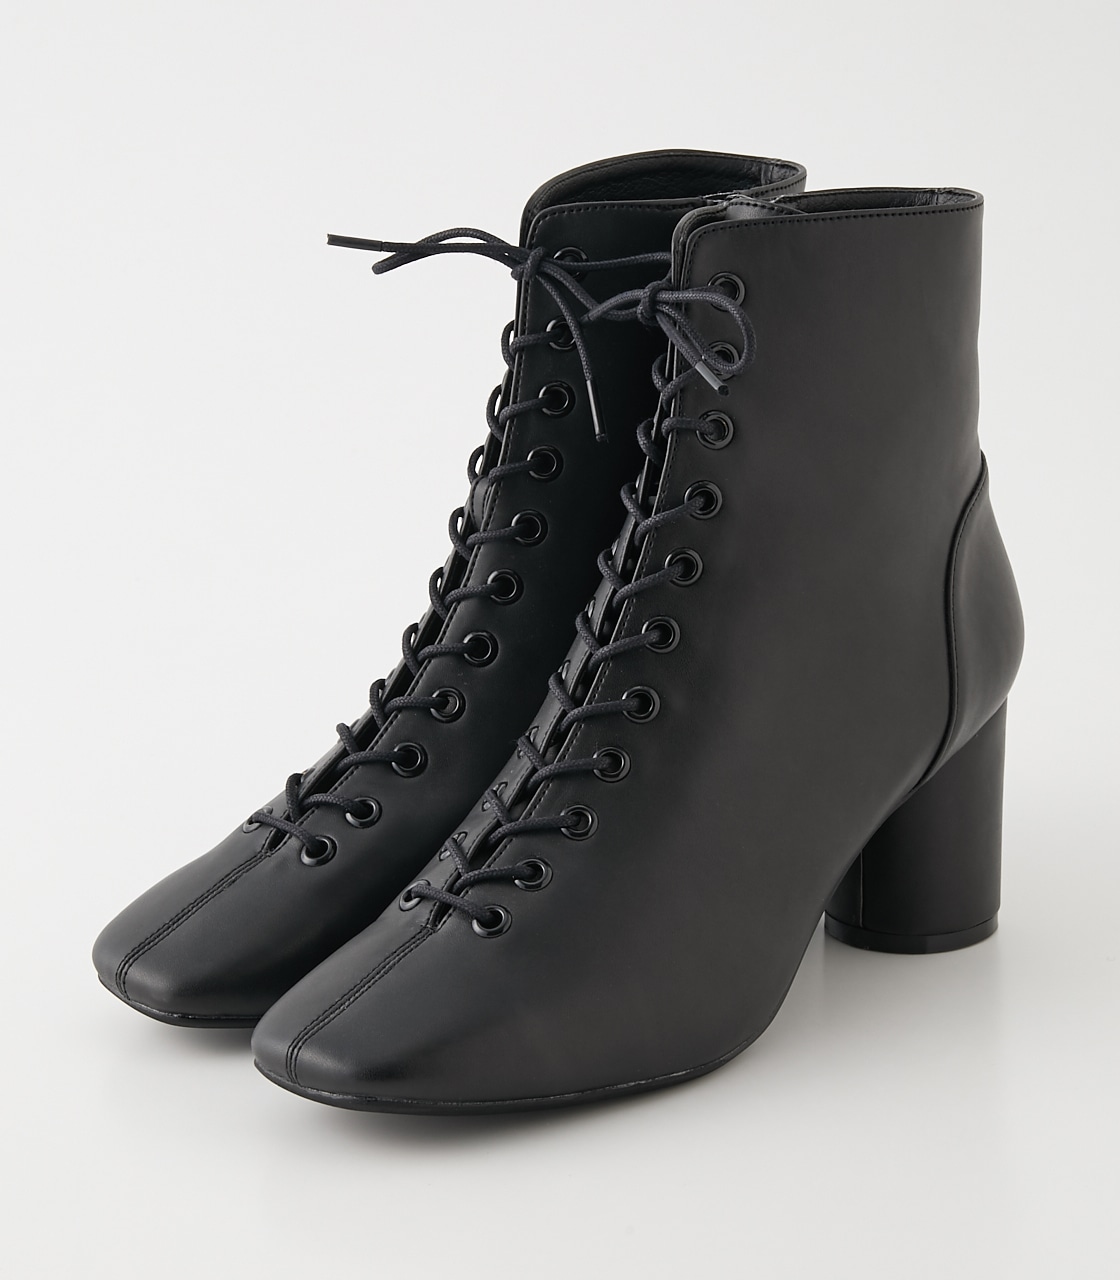 SQUARE TOE LACE UP BOOTS/スクエアトゥレースアップブーツ 詳細画像 BLK 1